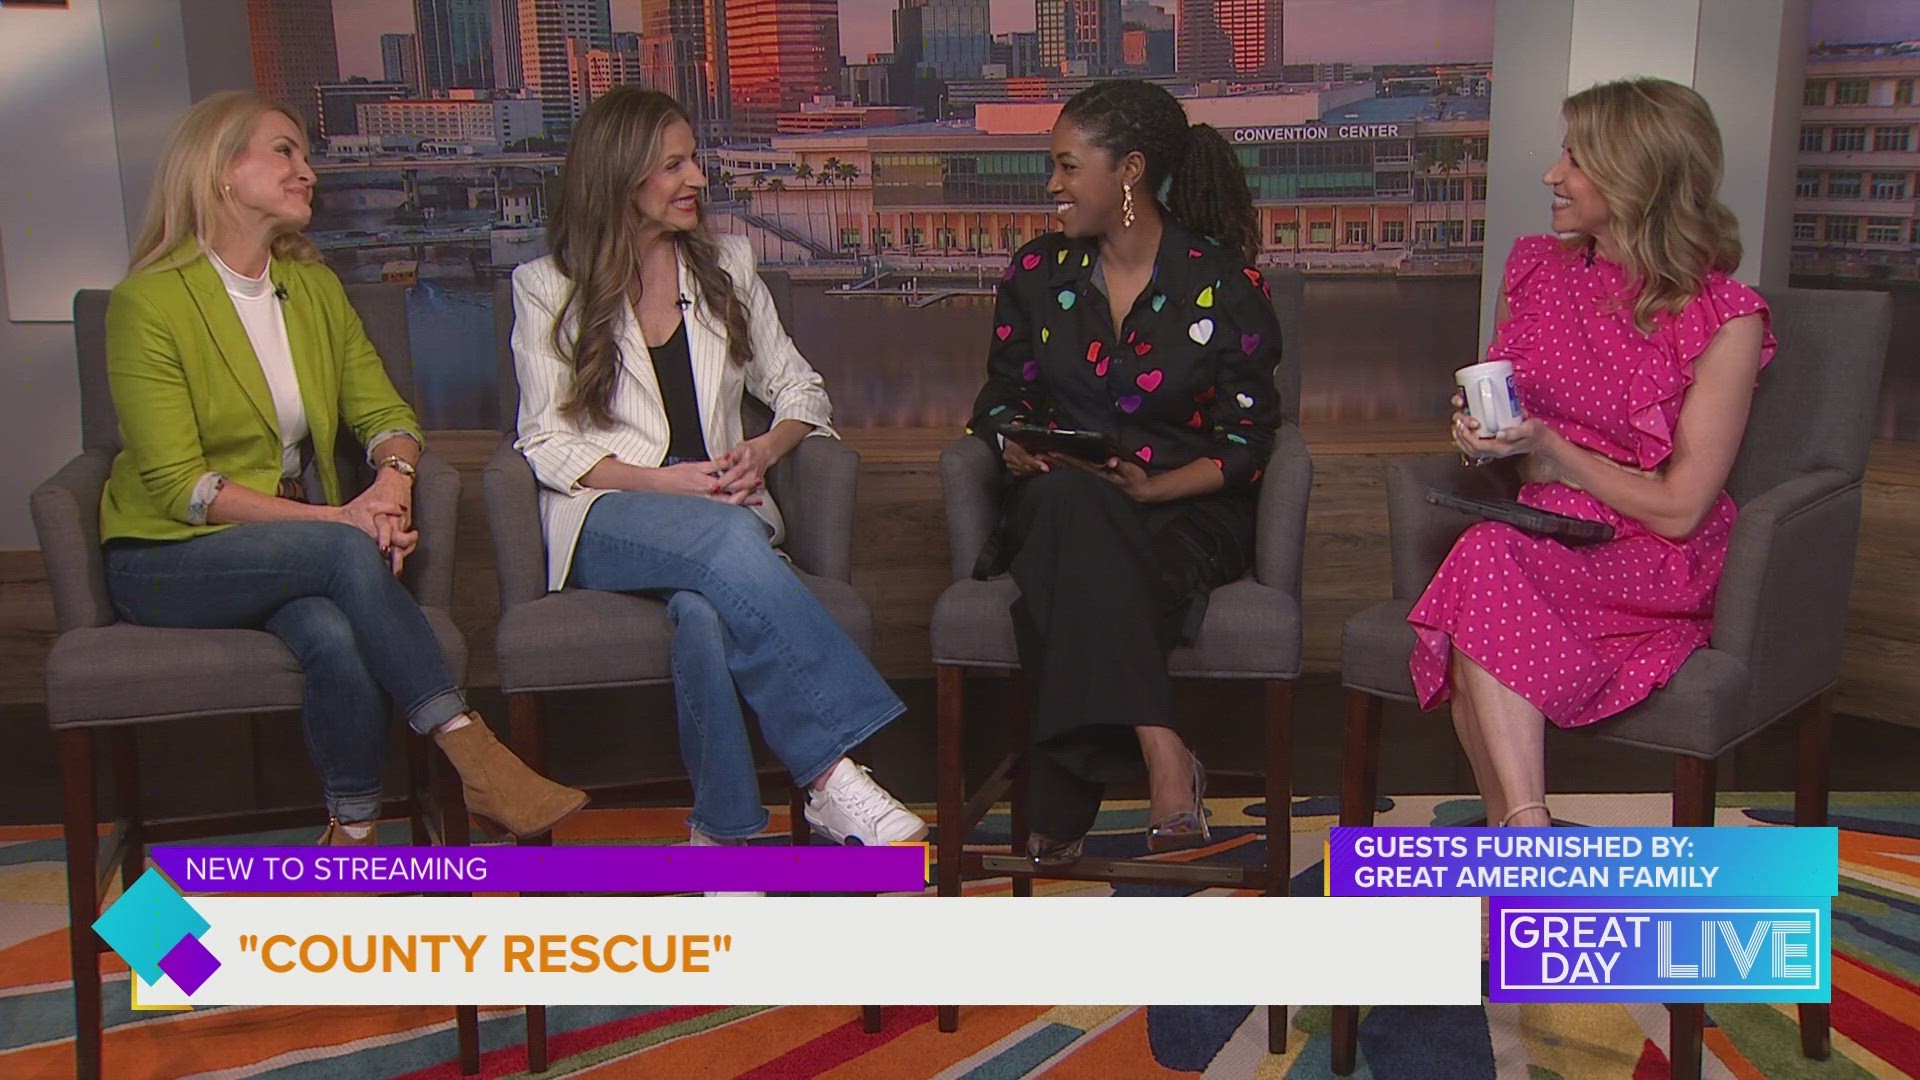 County Rescue is a new medical drama on the Great American Family channel, and it stars two actors from Florida.